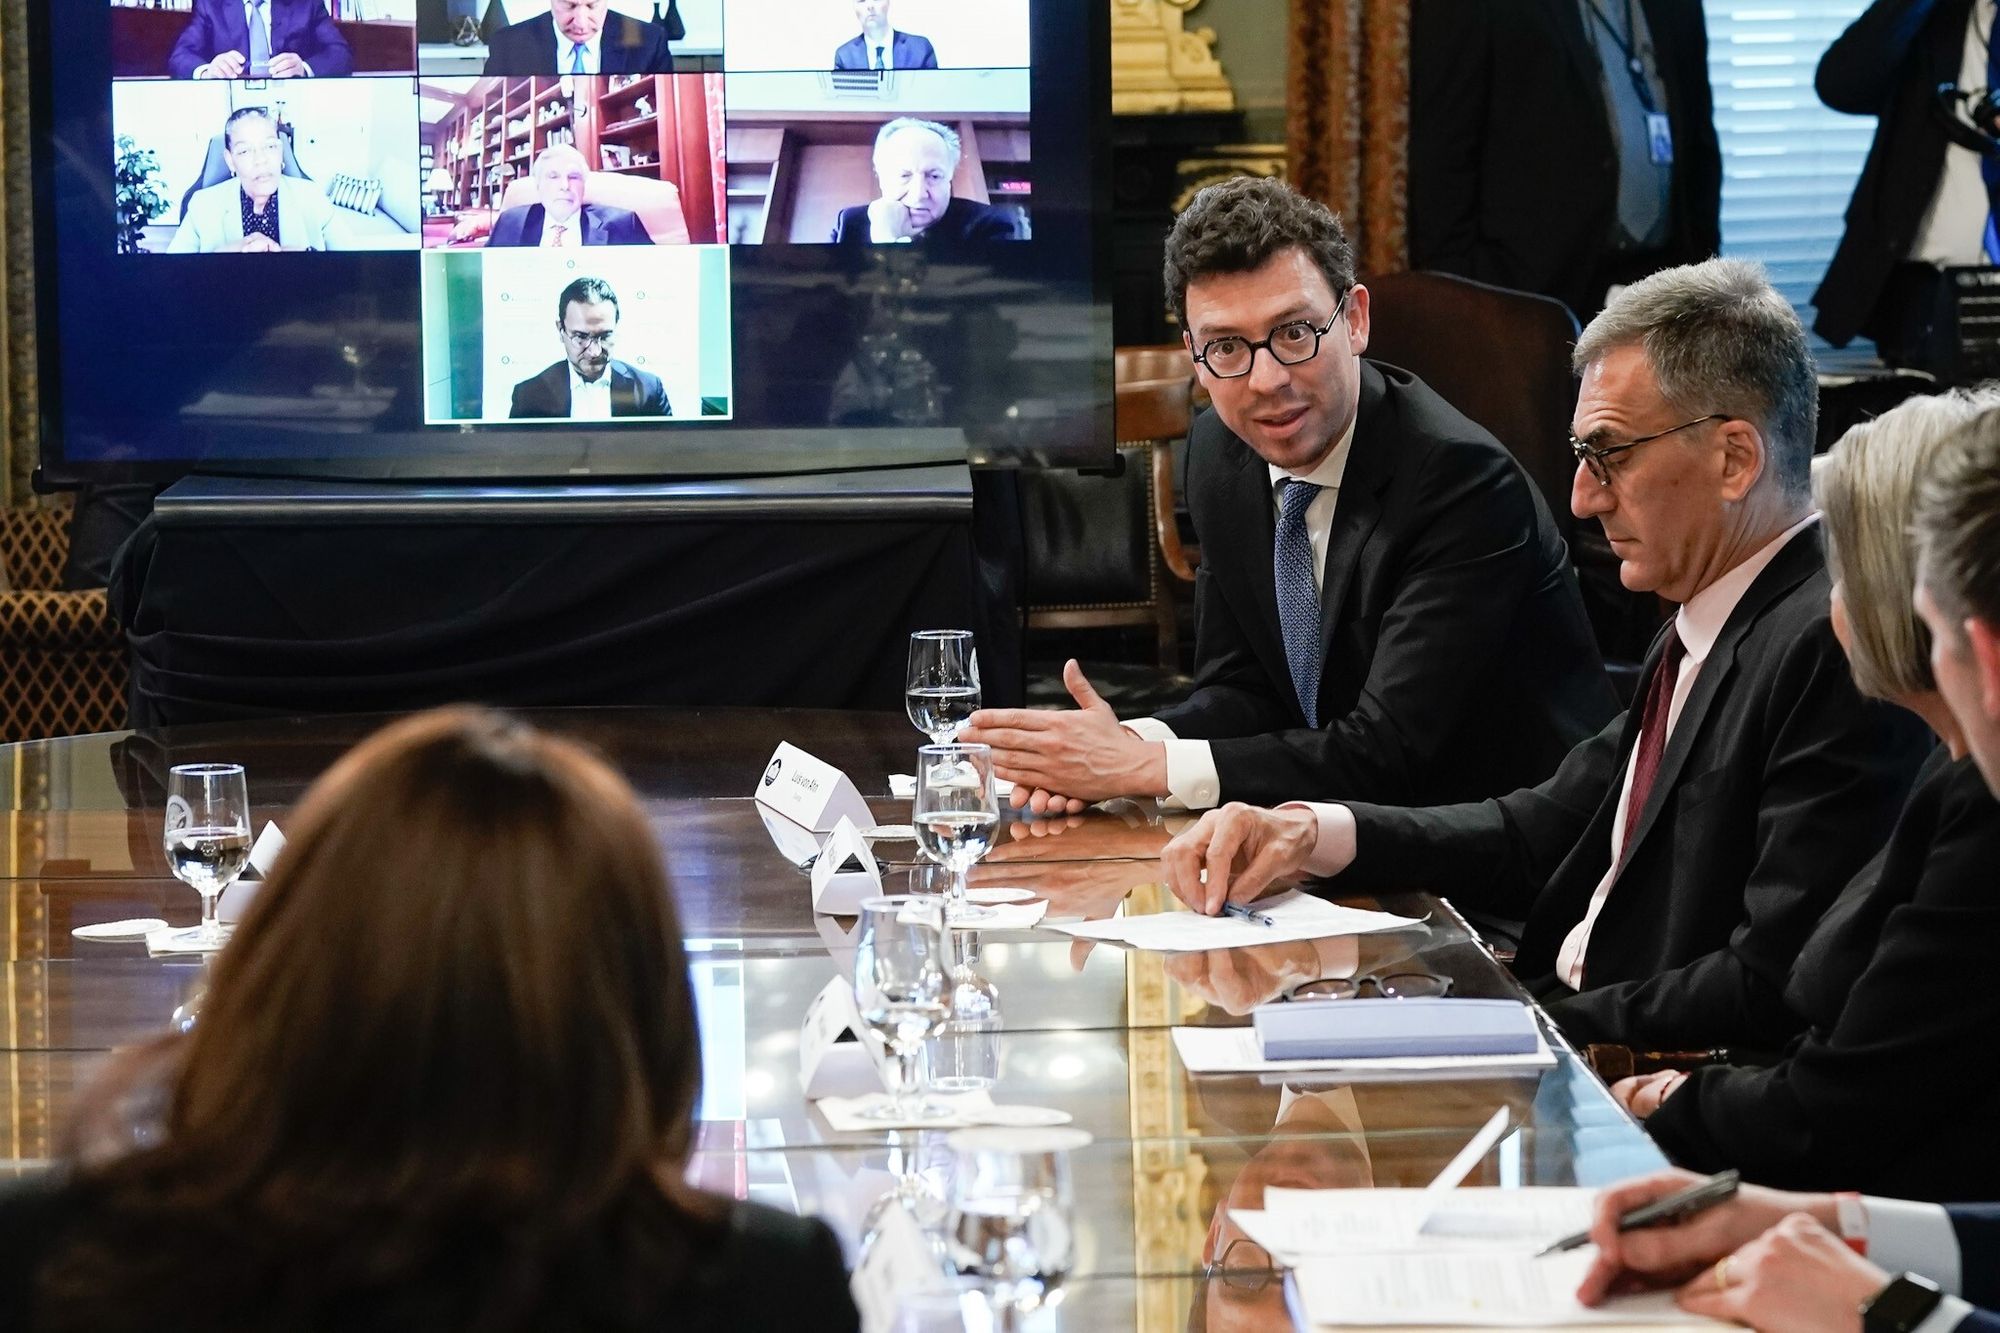 Photograph of Duolingo CEO Luis von Ahn at a boardroom table. Vice President Kamala Harris is in the foreground, with her back to the camera. She is at the head of the table. Luis is speaking directly to the Vice President